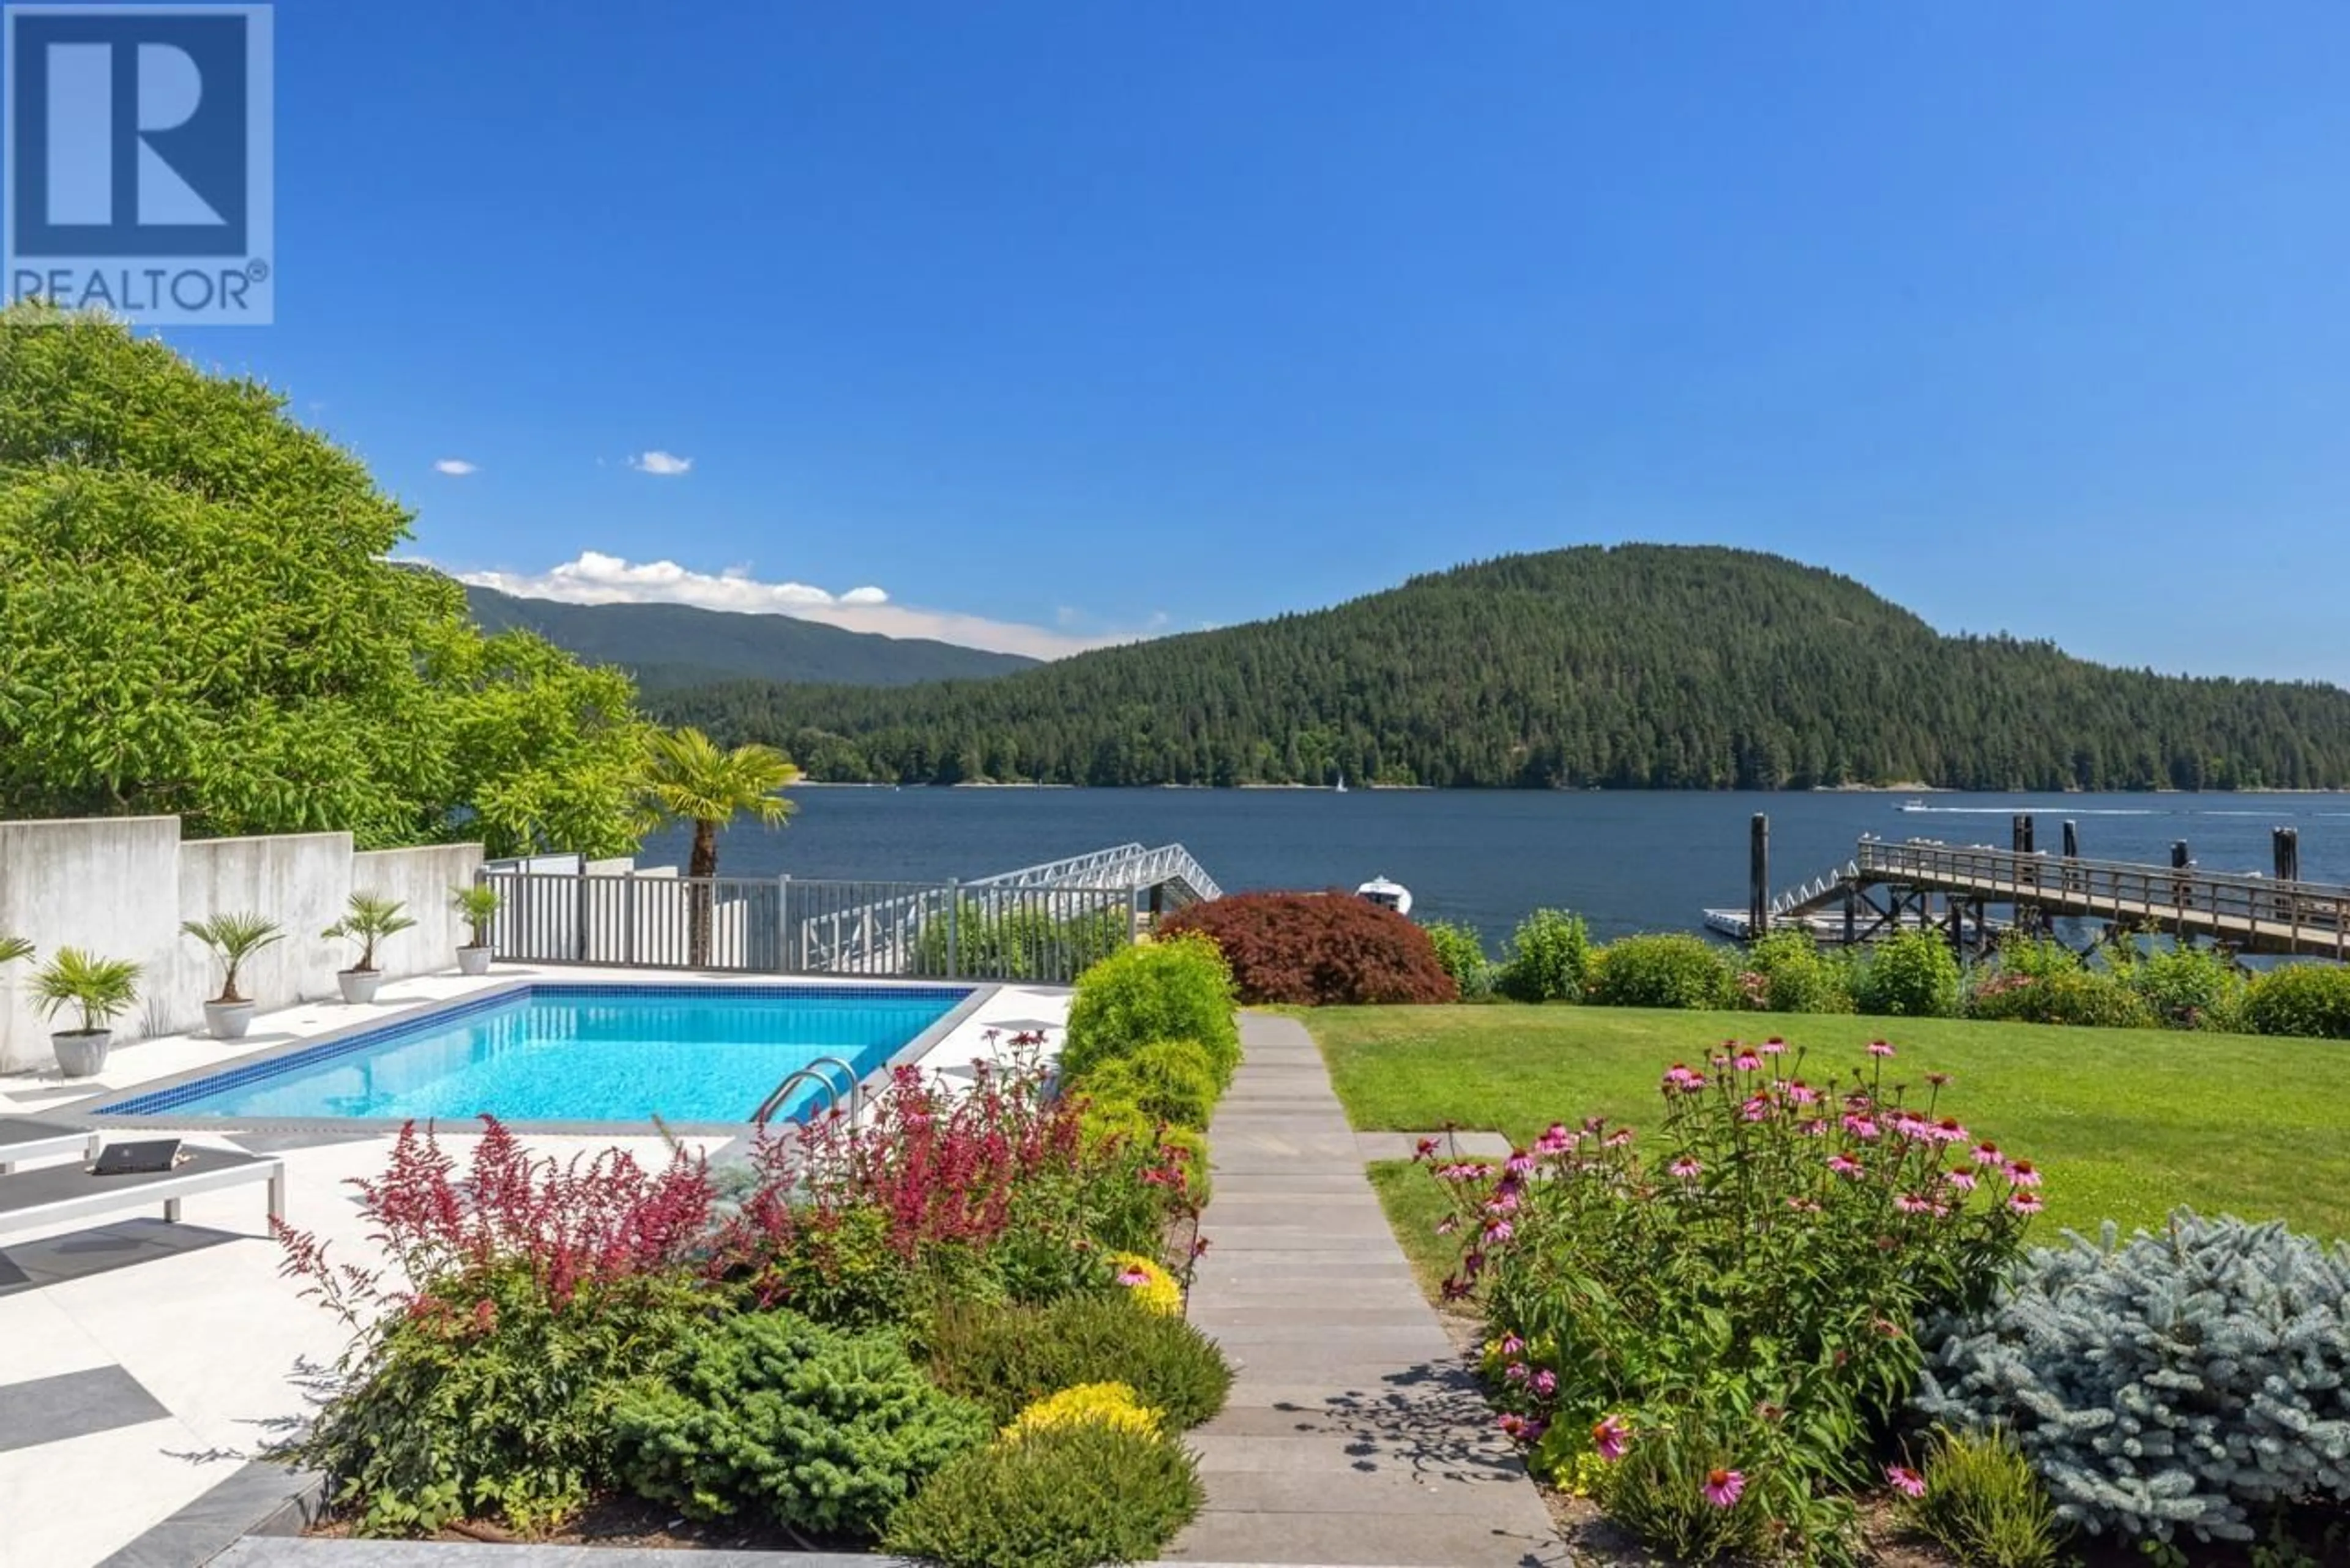 Lakeview for 588 LOWRY LANE, North Vancouver British Columbia V7G1R3